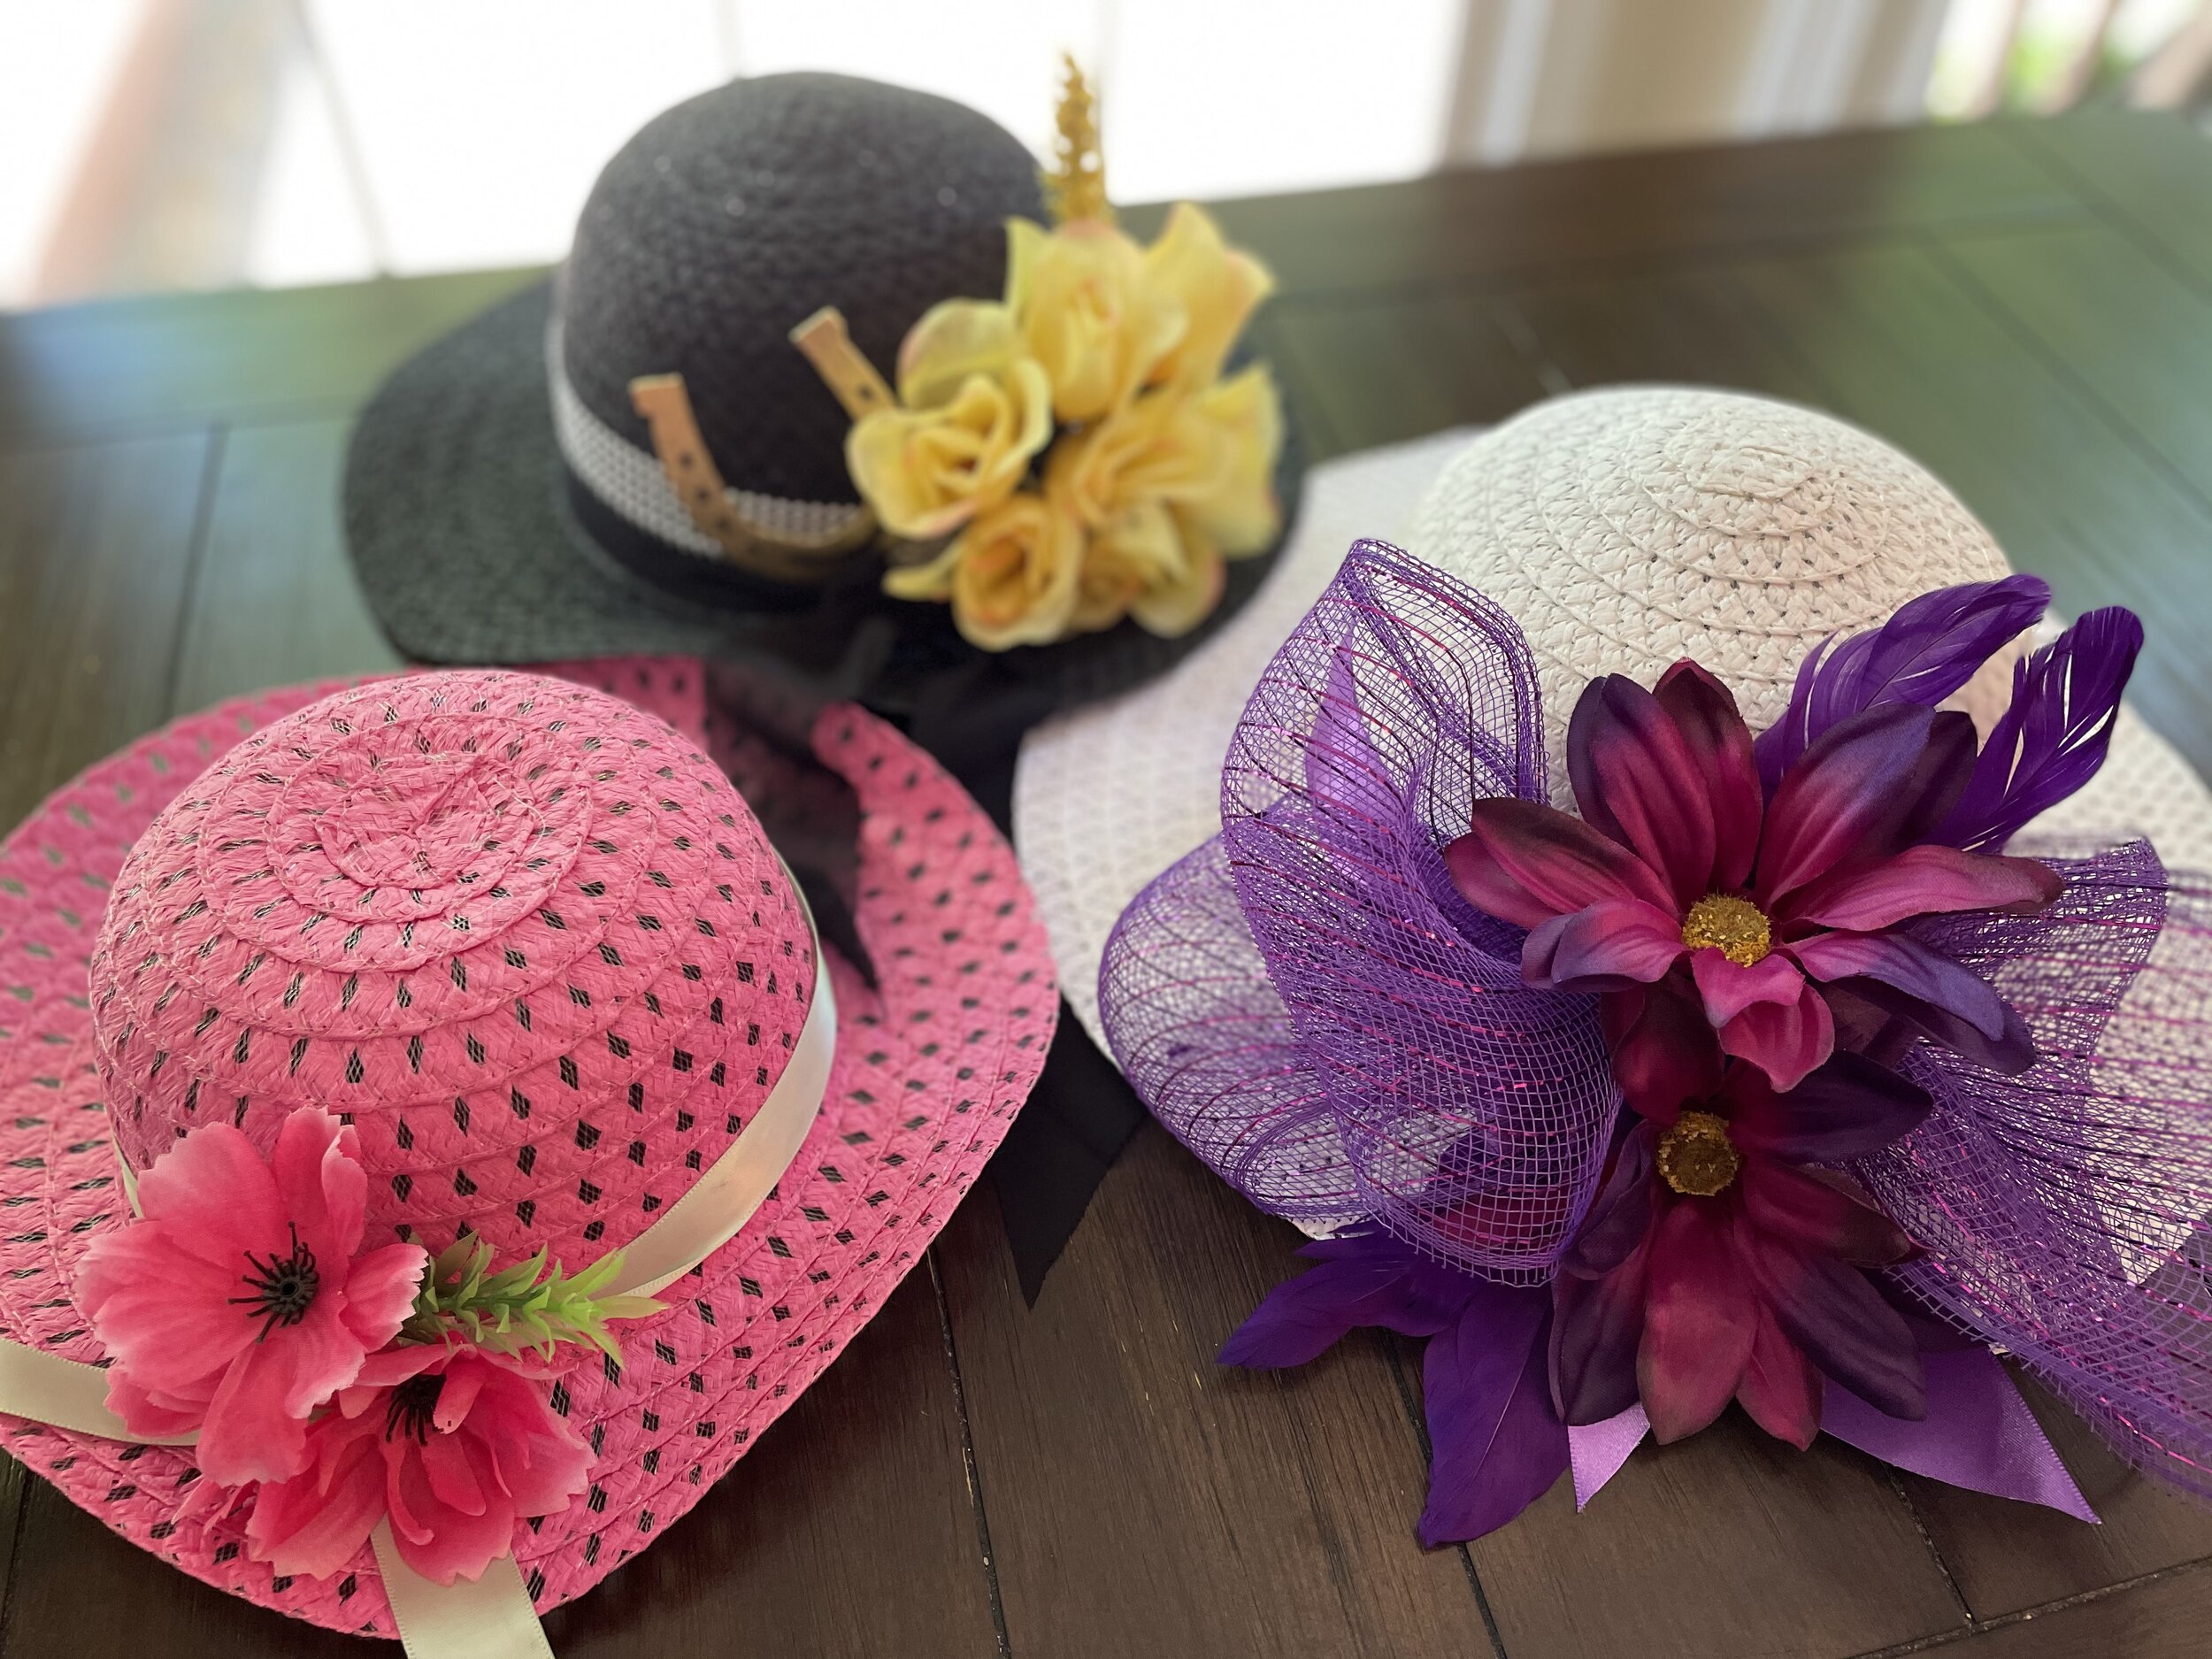 How to Make Your Own Derby Hat: An Easy Guide